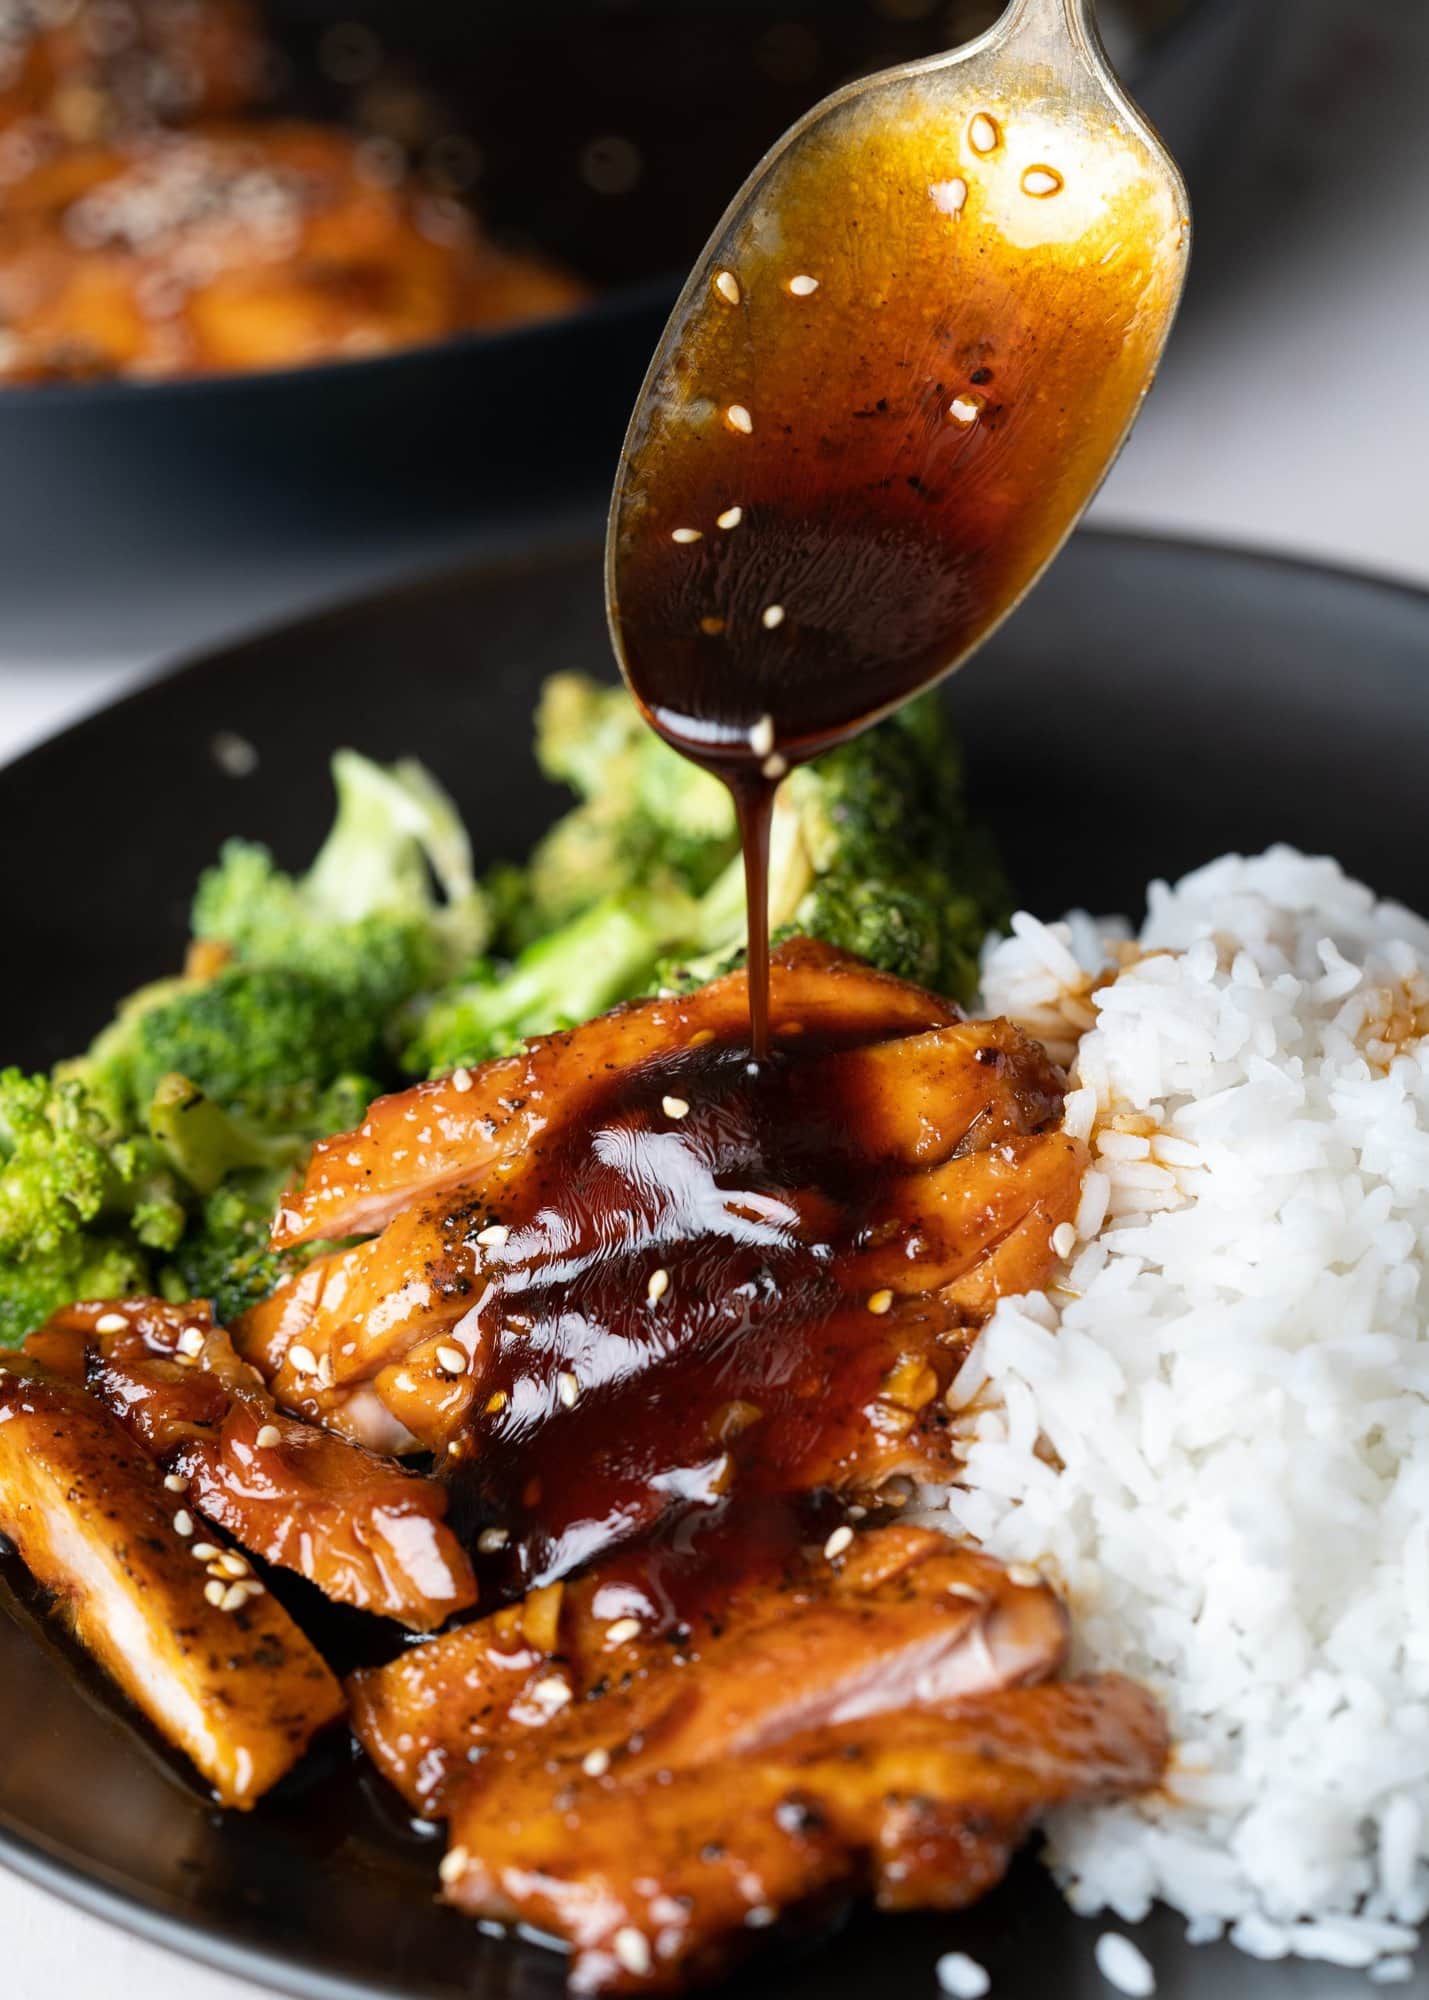 Sticky honey garlic sauce with a nice glaze is spooned over sliced chicken and served with rice and broccoli on a plate